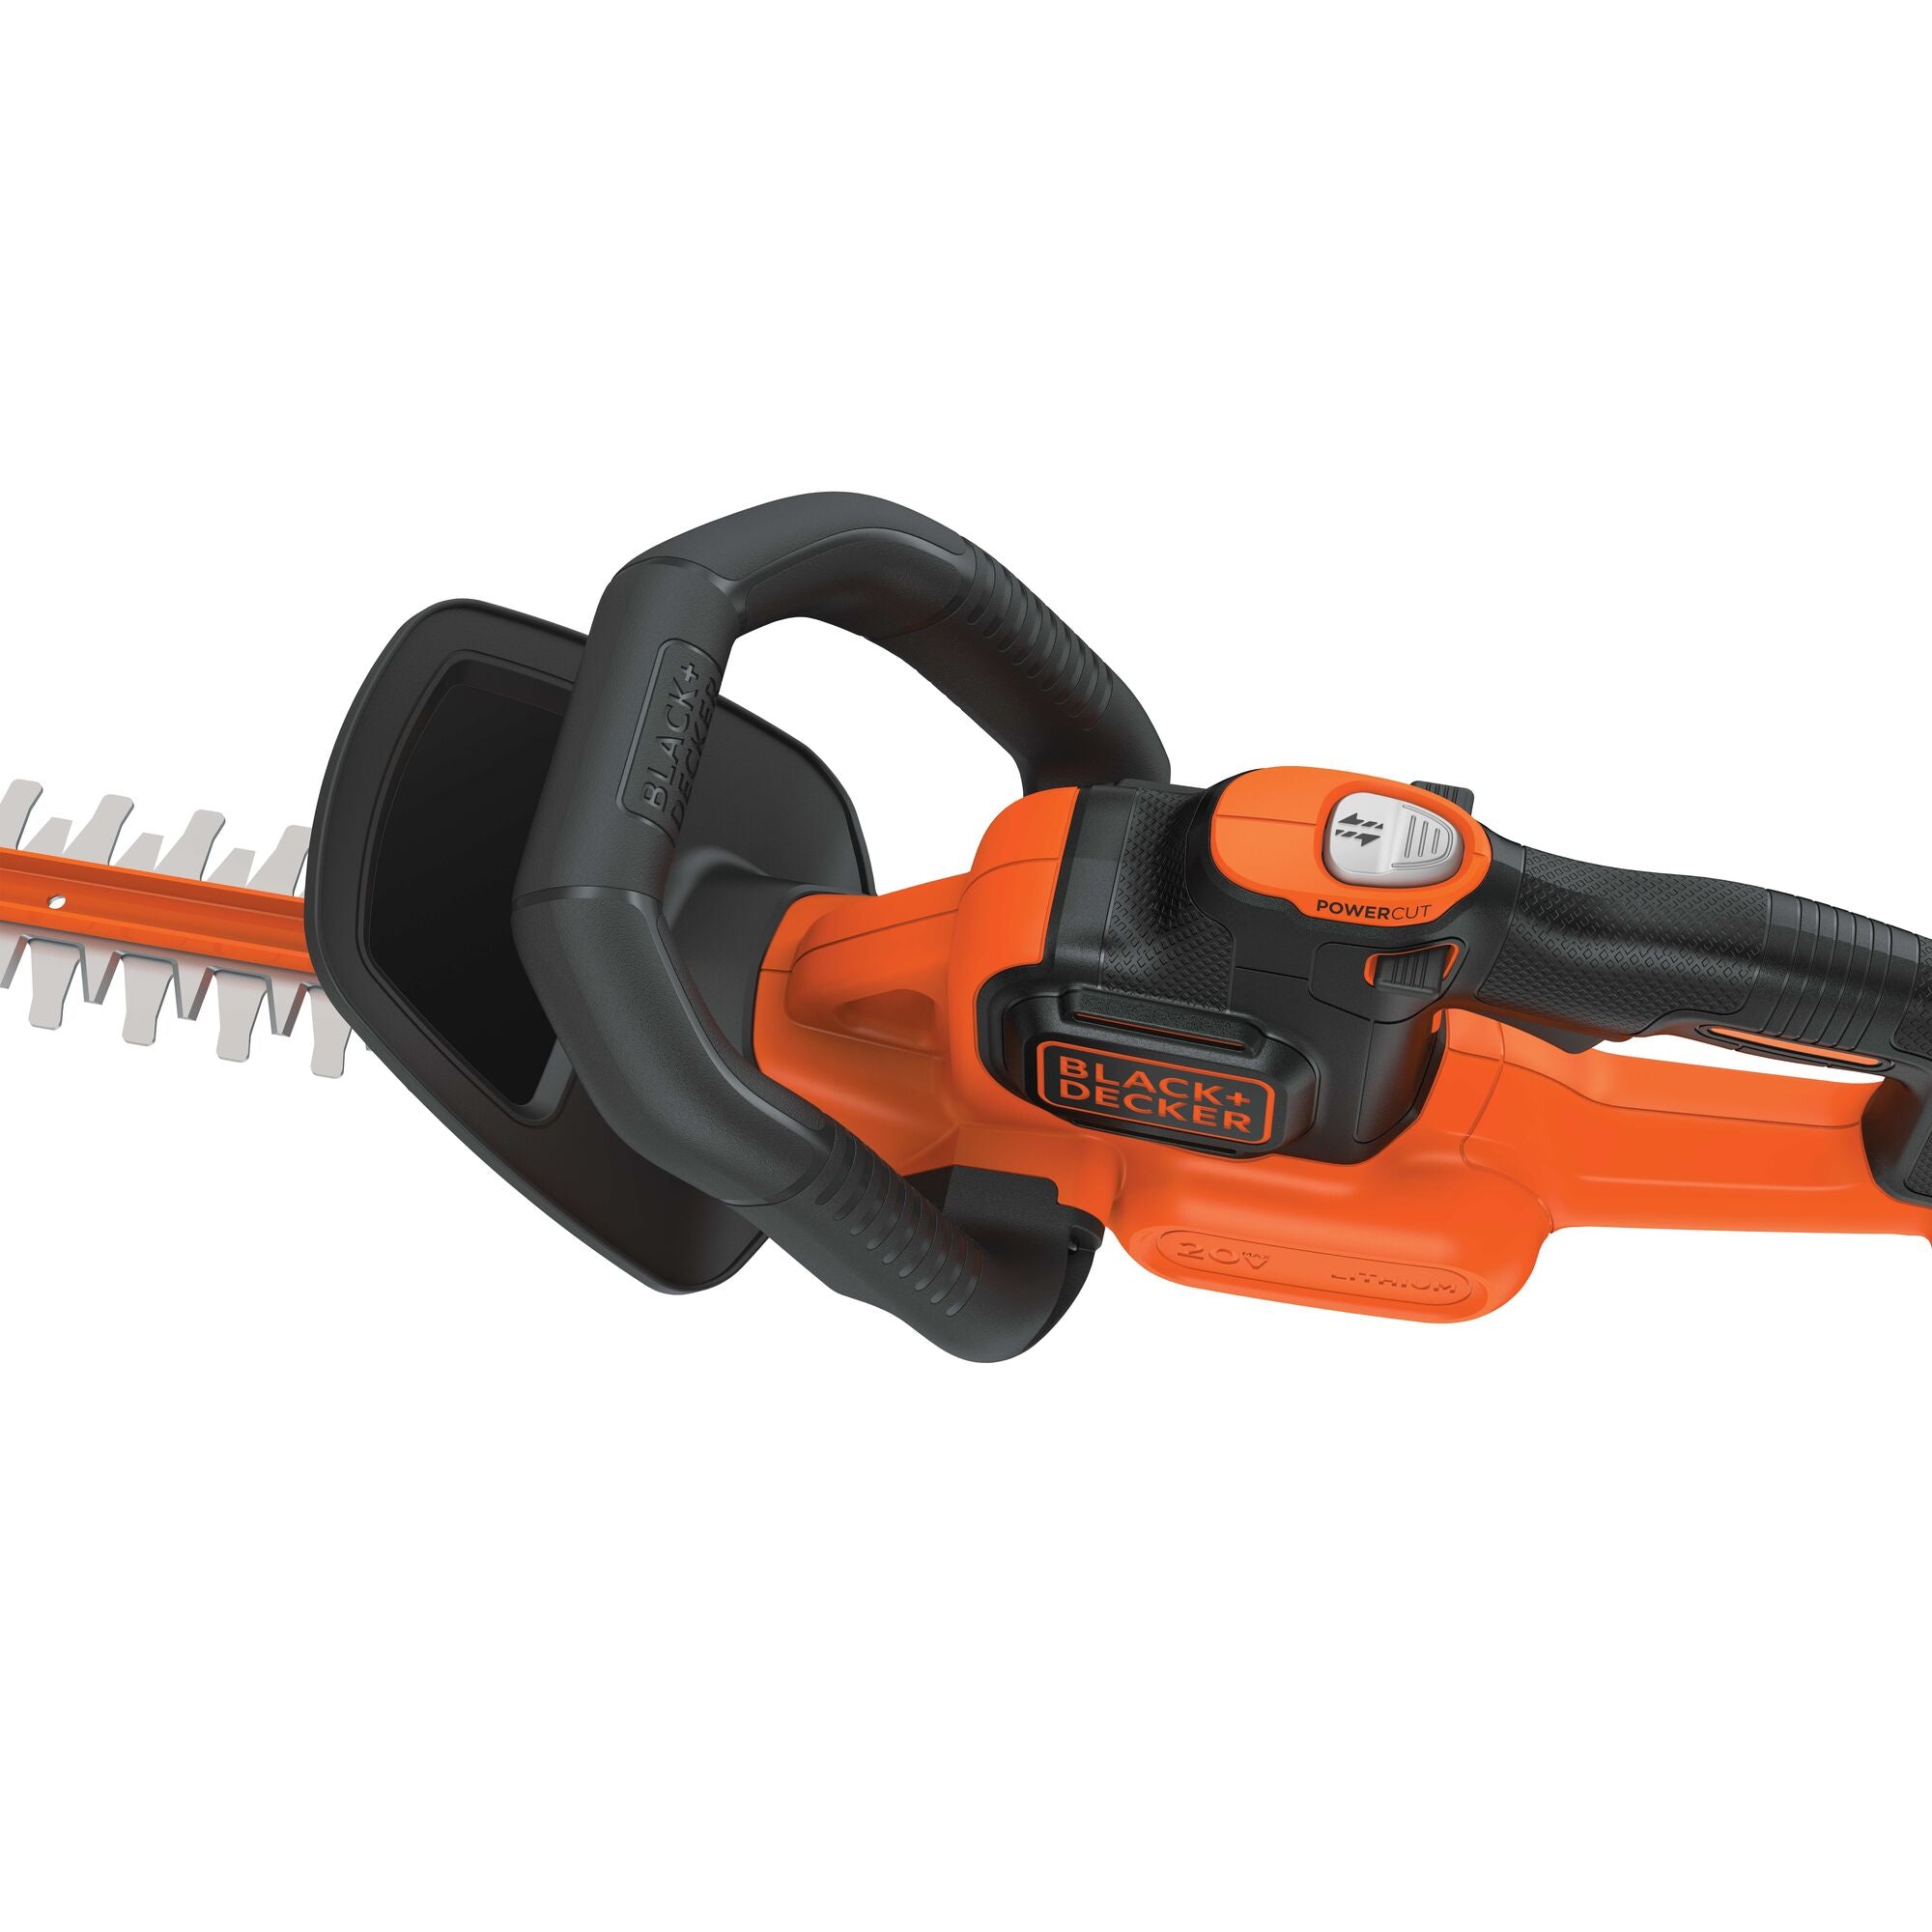 40 volt lithium 24 inch powercut hedge trimmer being used by a person.